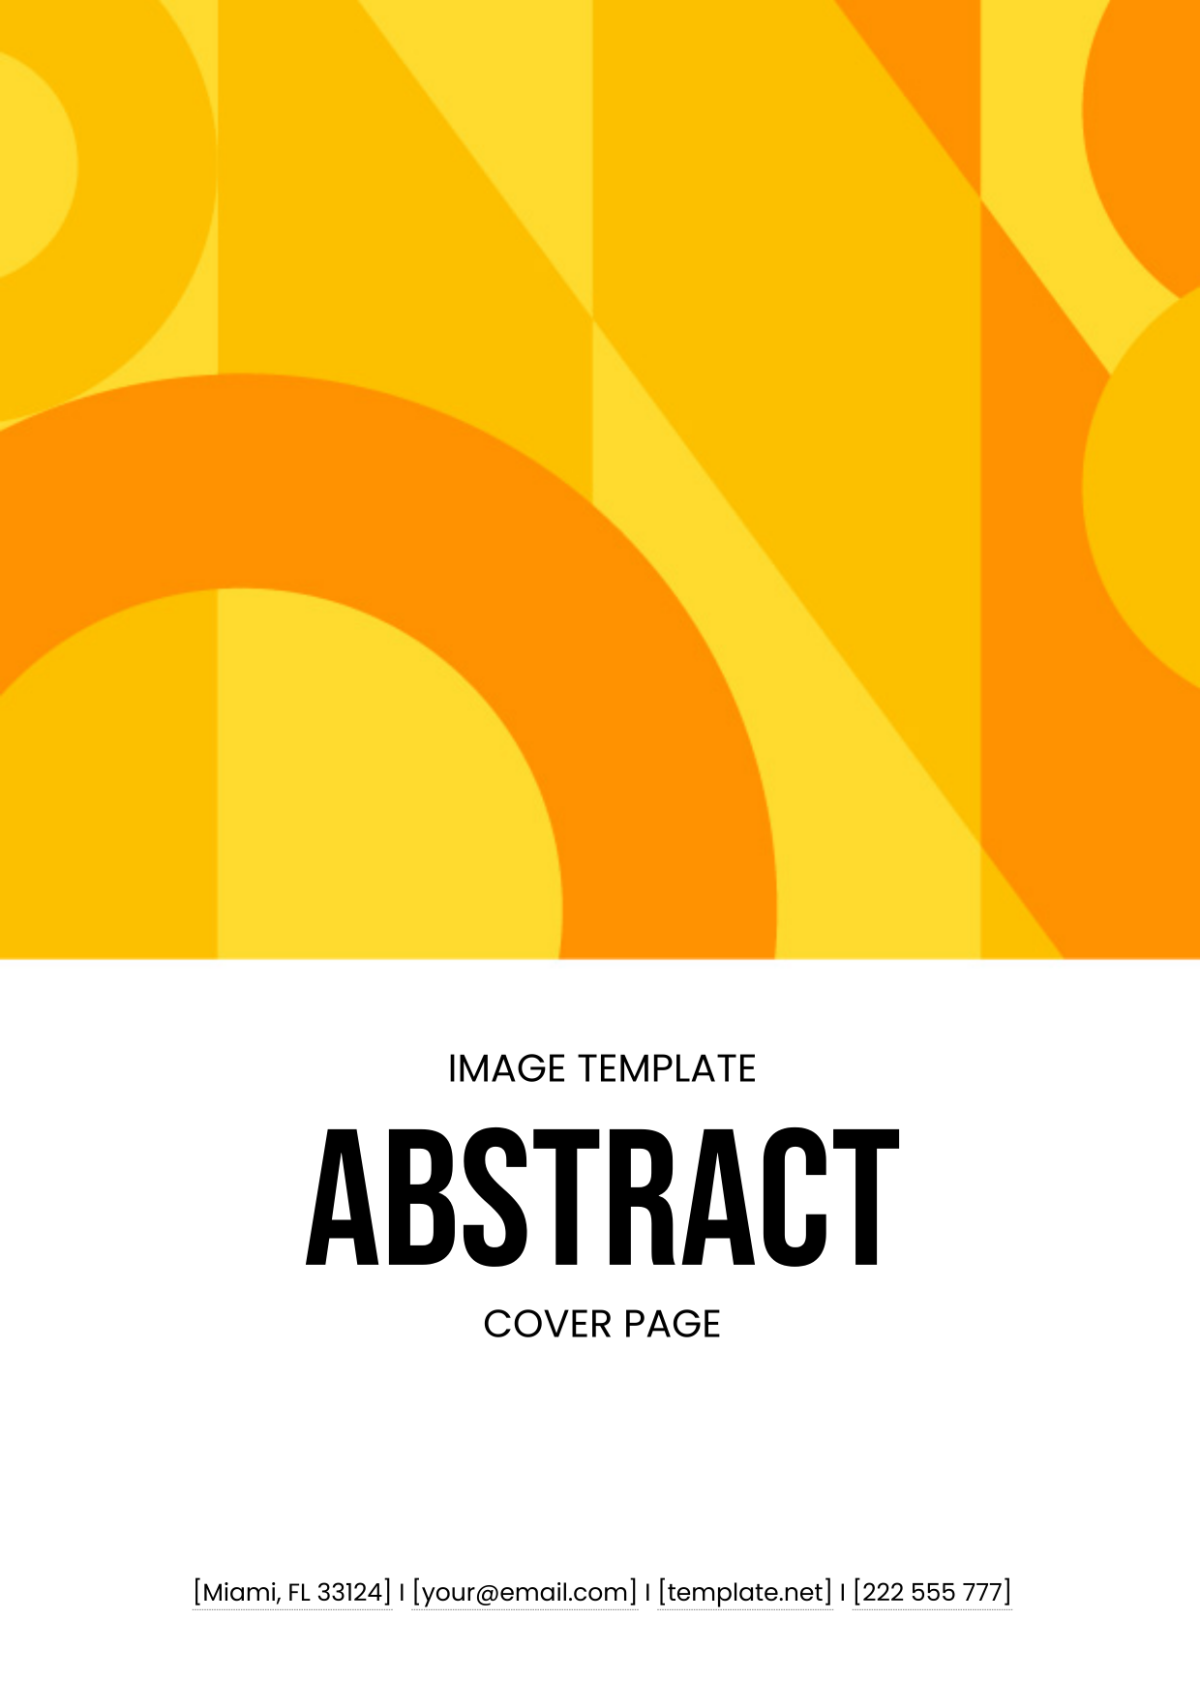 Abstract Cover Page Image Template